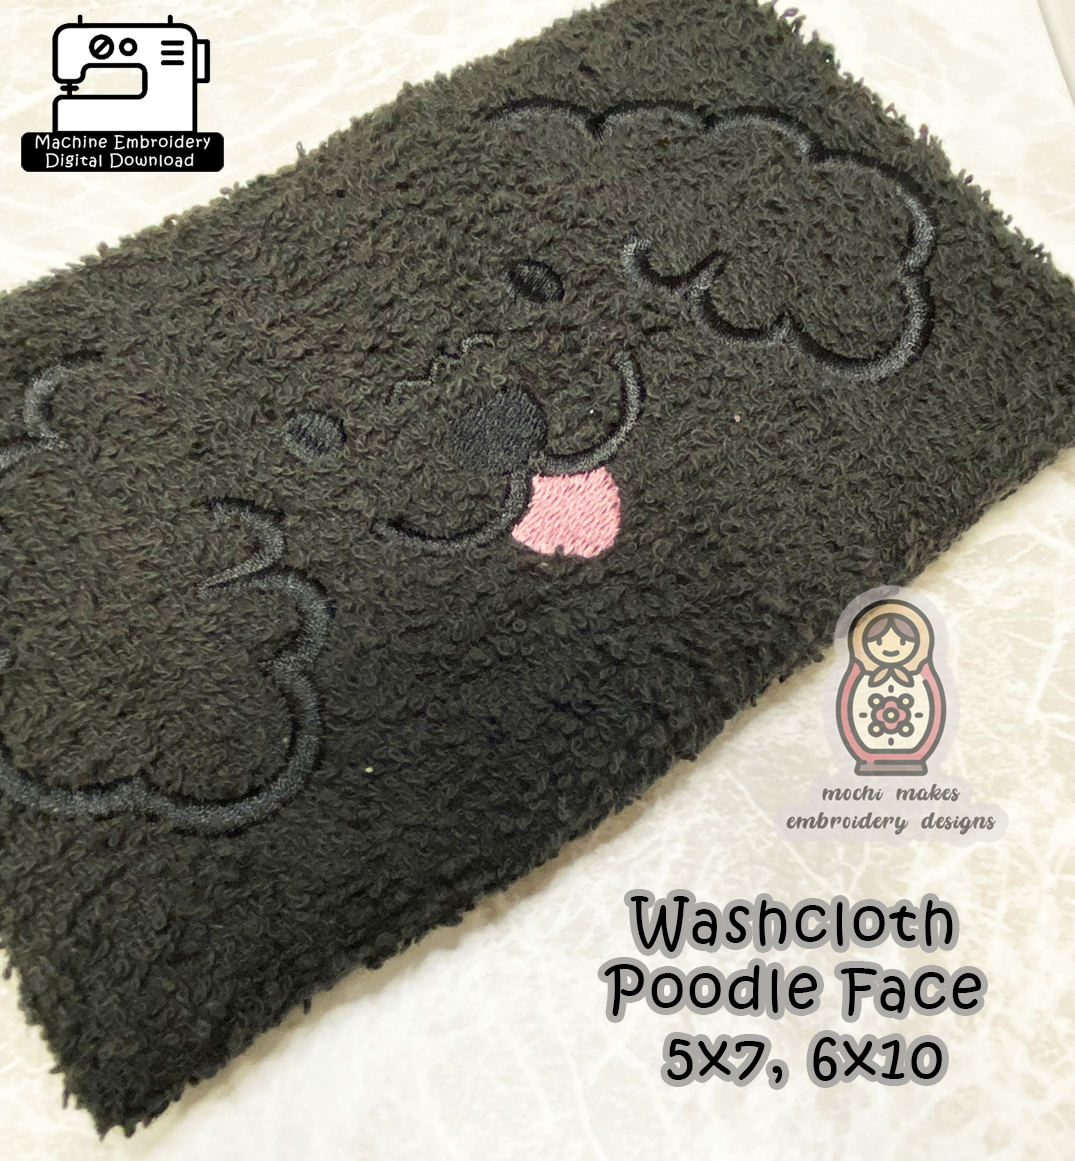 Poodle Dog Breed Face Washcloth 5x7 6x10 Machine Embroidery Digital Download Design File